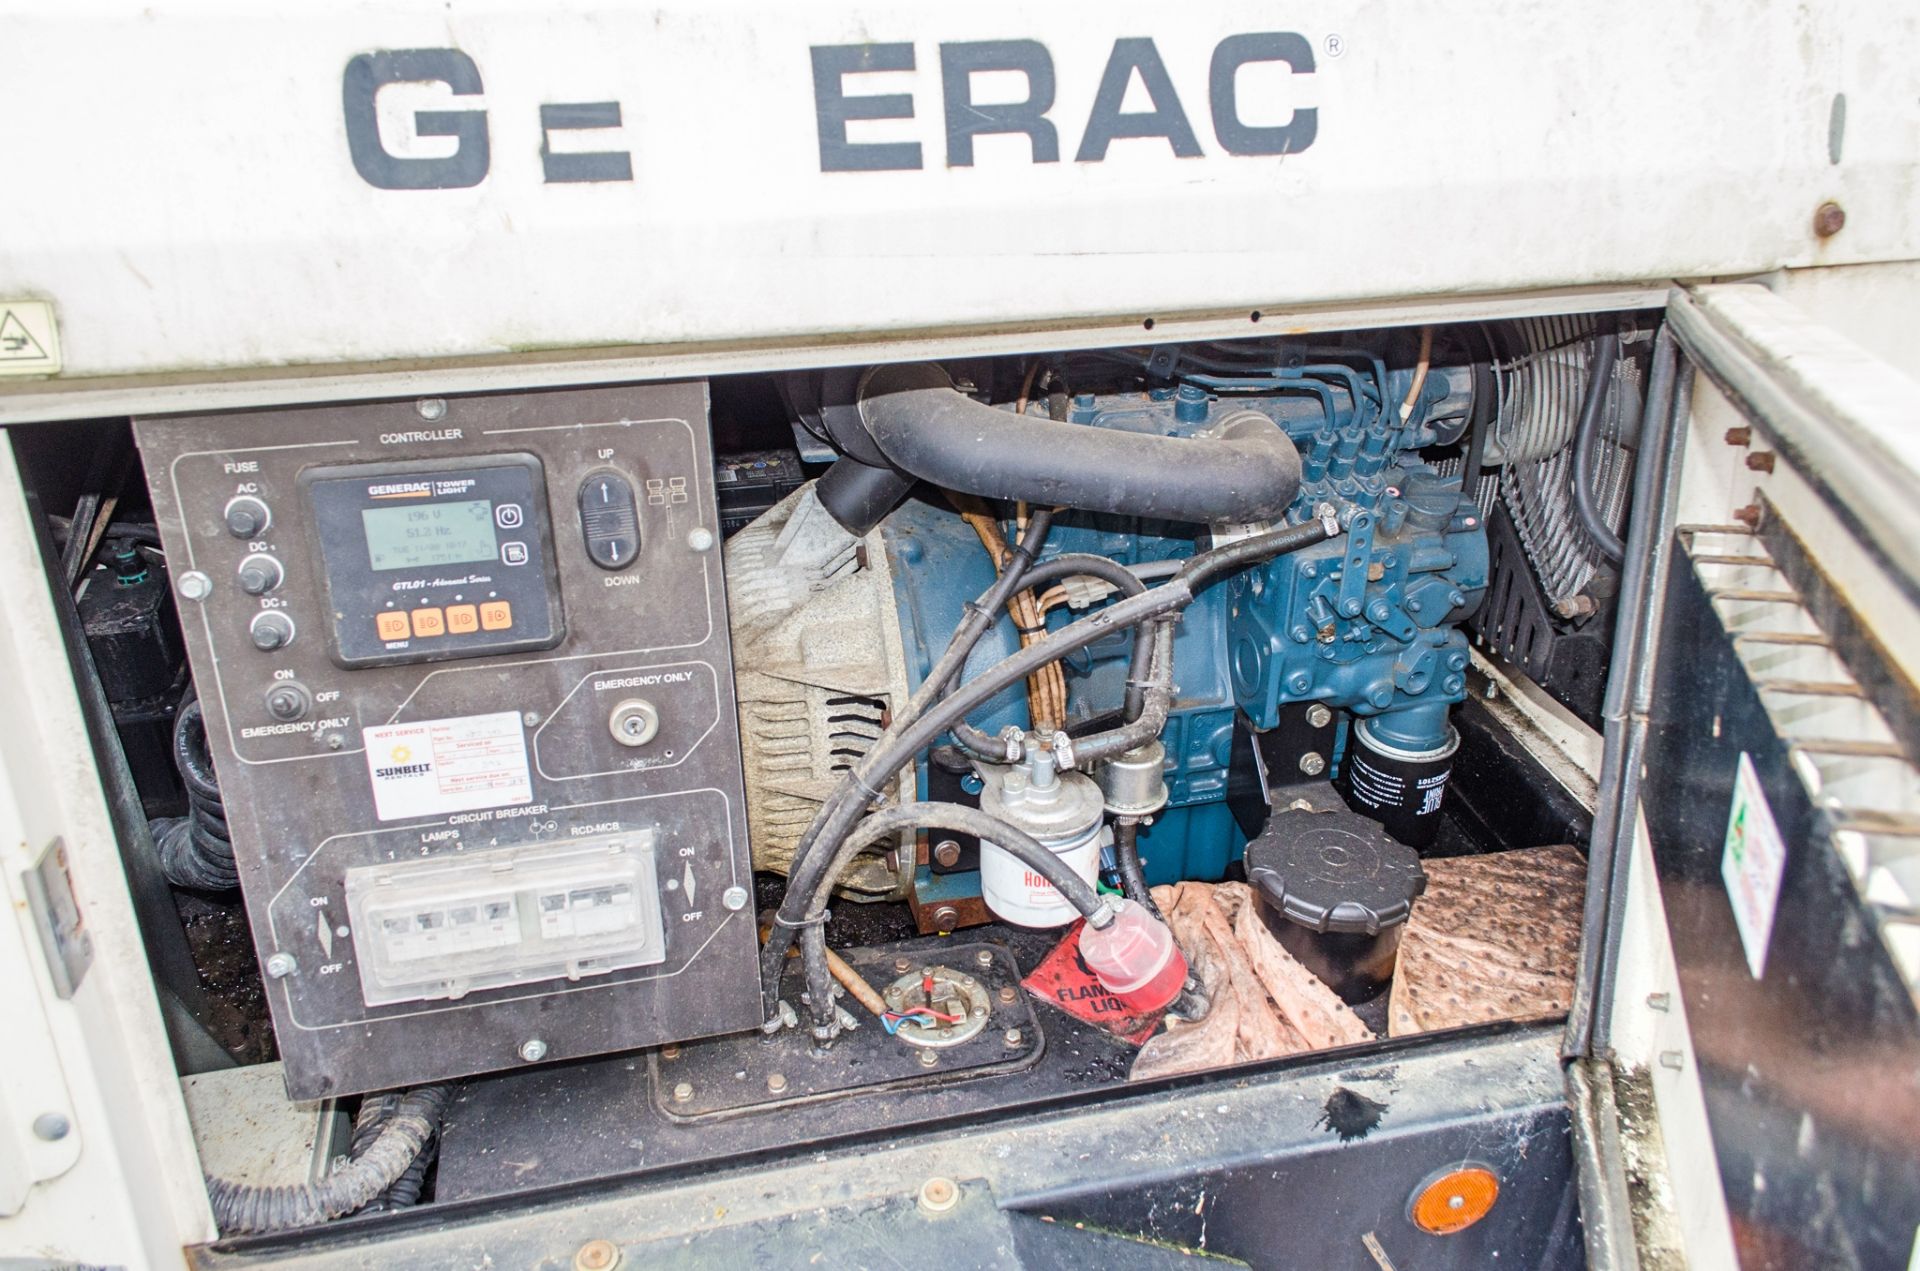 Generac VT-1 fast tow diesel driven tower light Year: 2016 S/N 1604285 Recorded hours: 1751 A753983 - Image 7 of 9